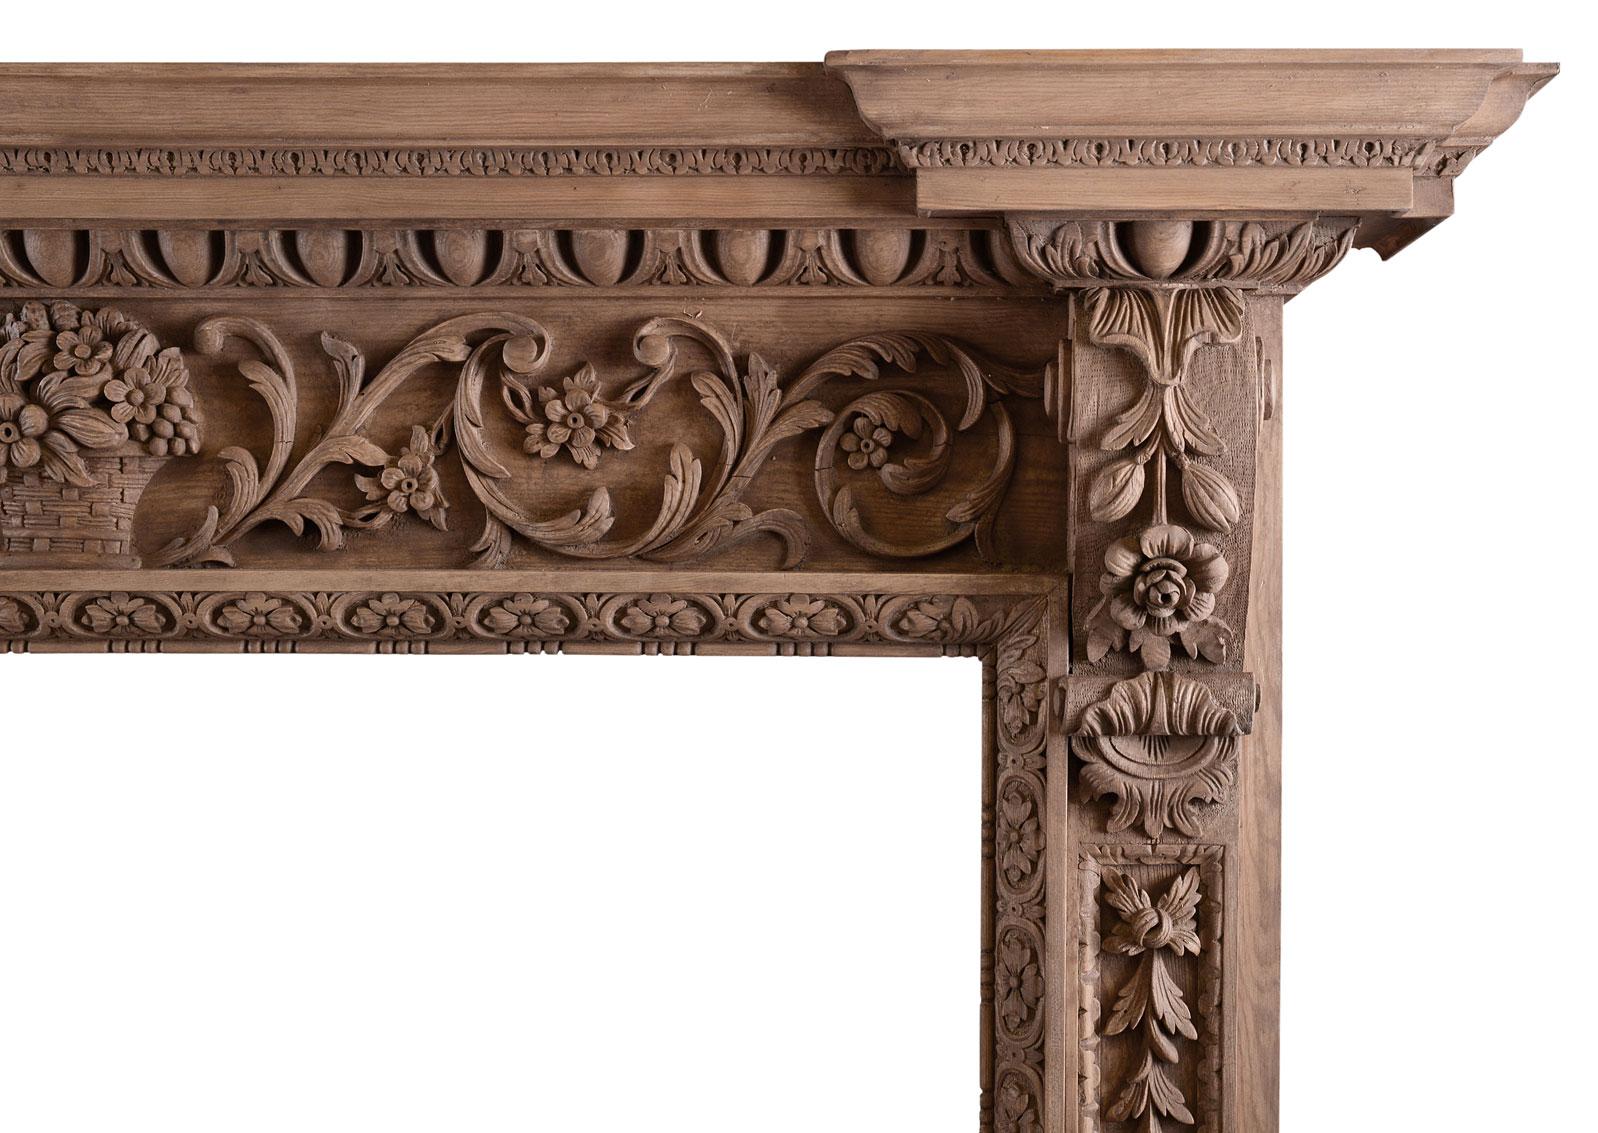 Georgian Ornate Pine Fireplace with Carving Throughout For Sale